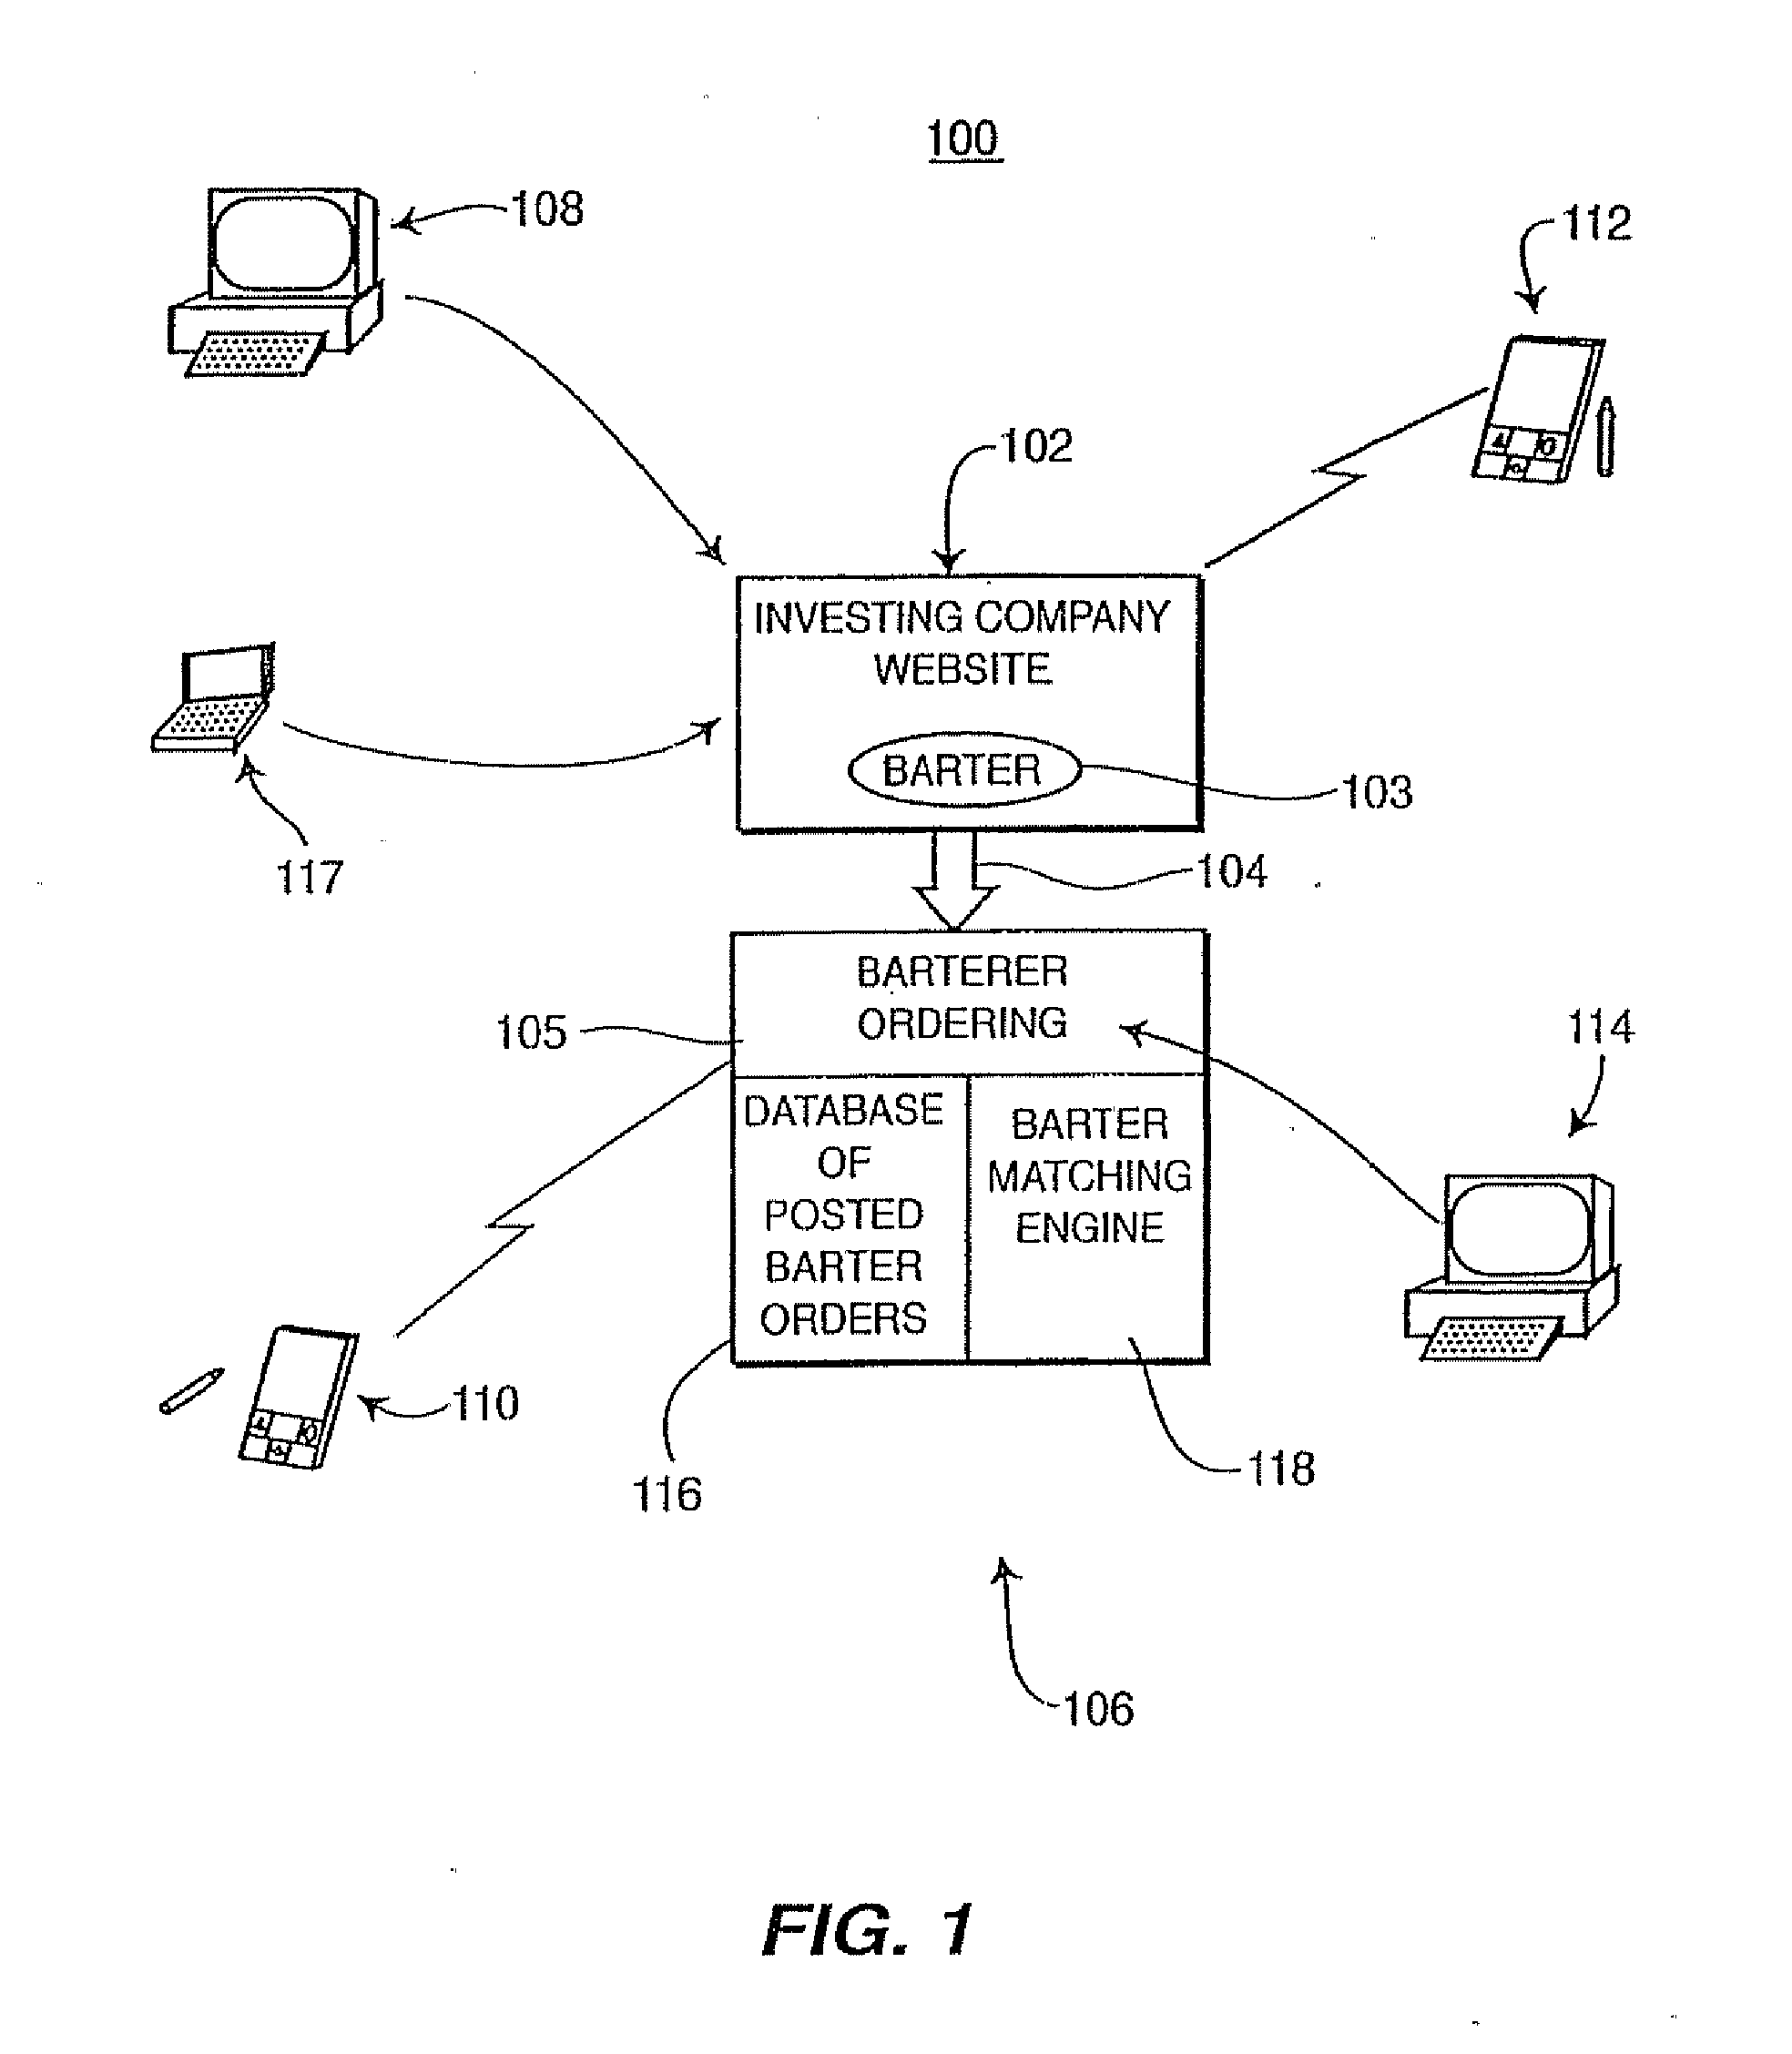 Electronic Bartering System with Facilitating Tools